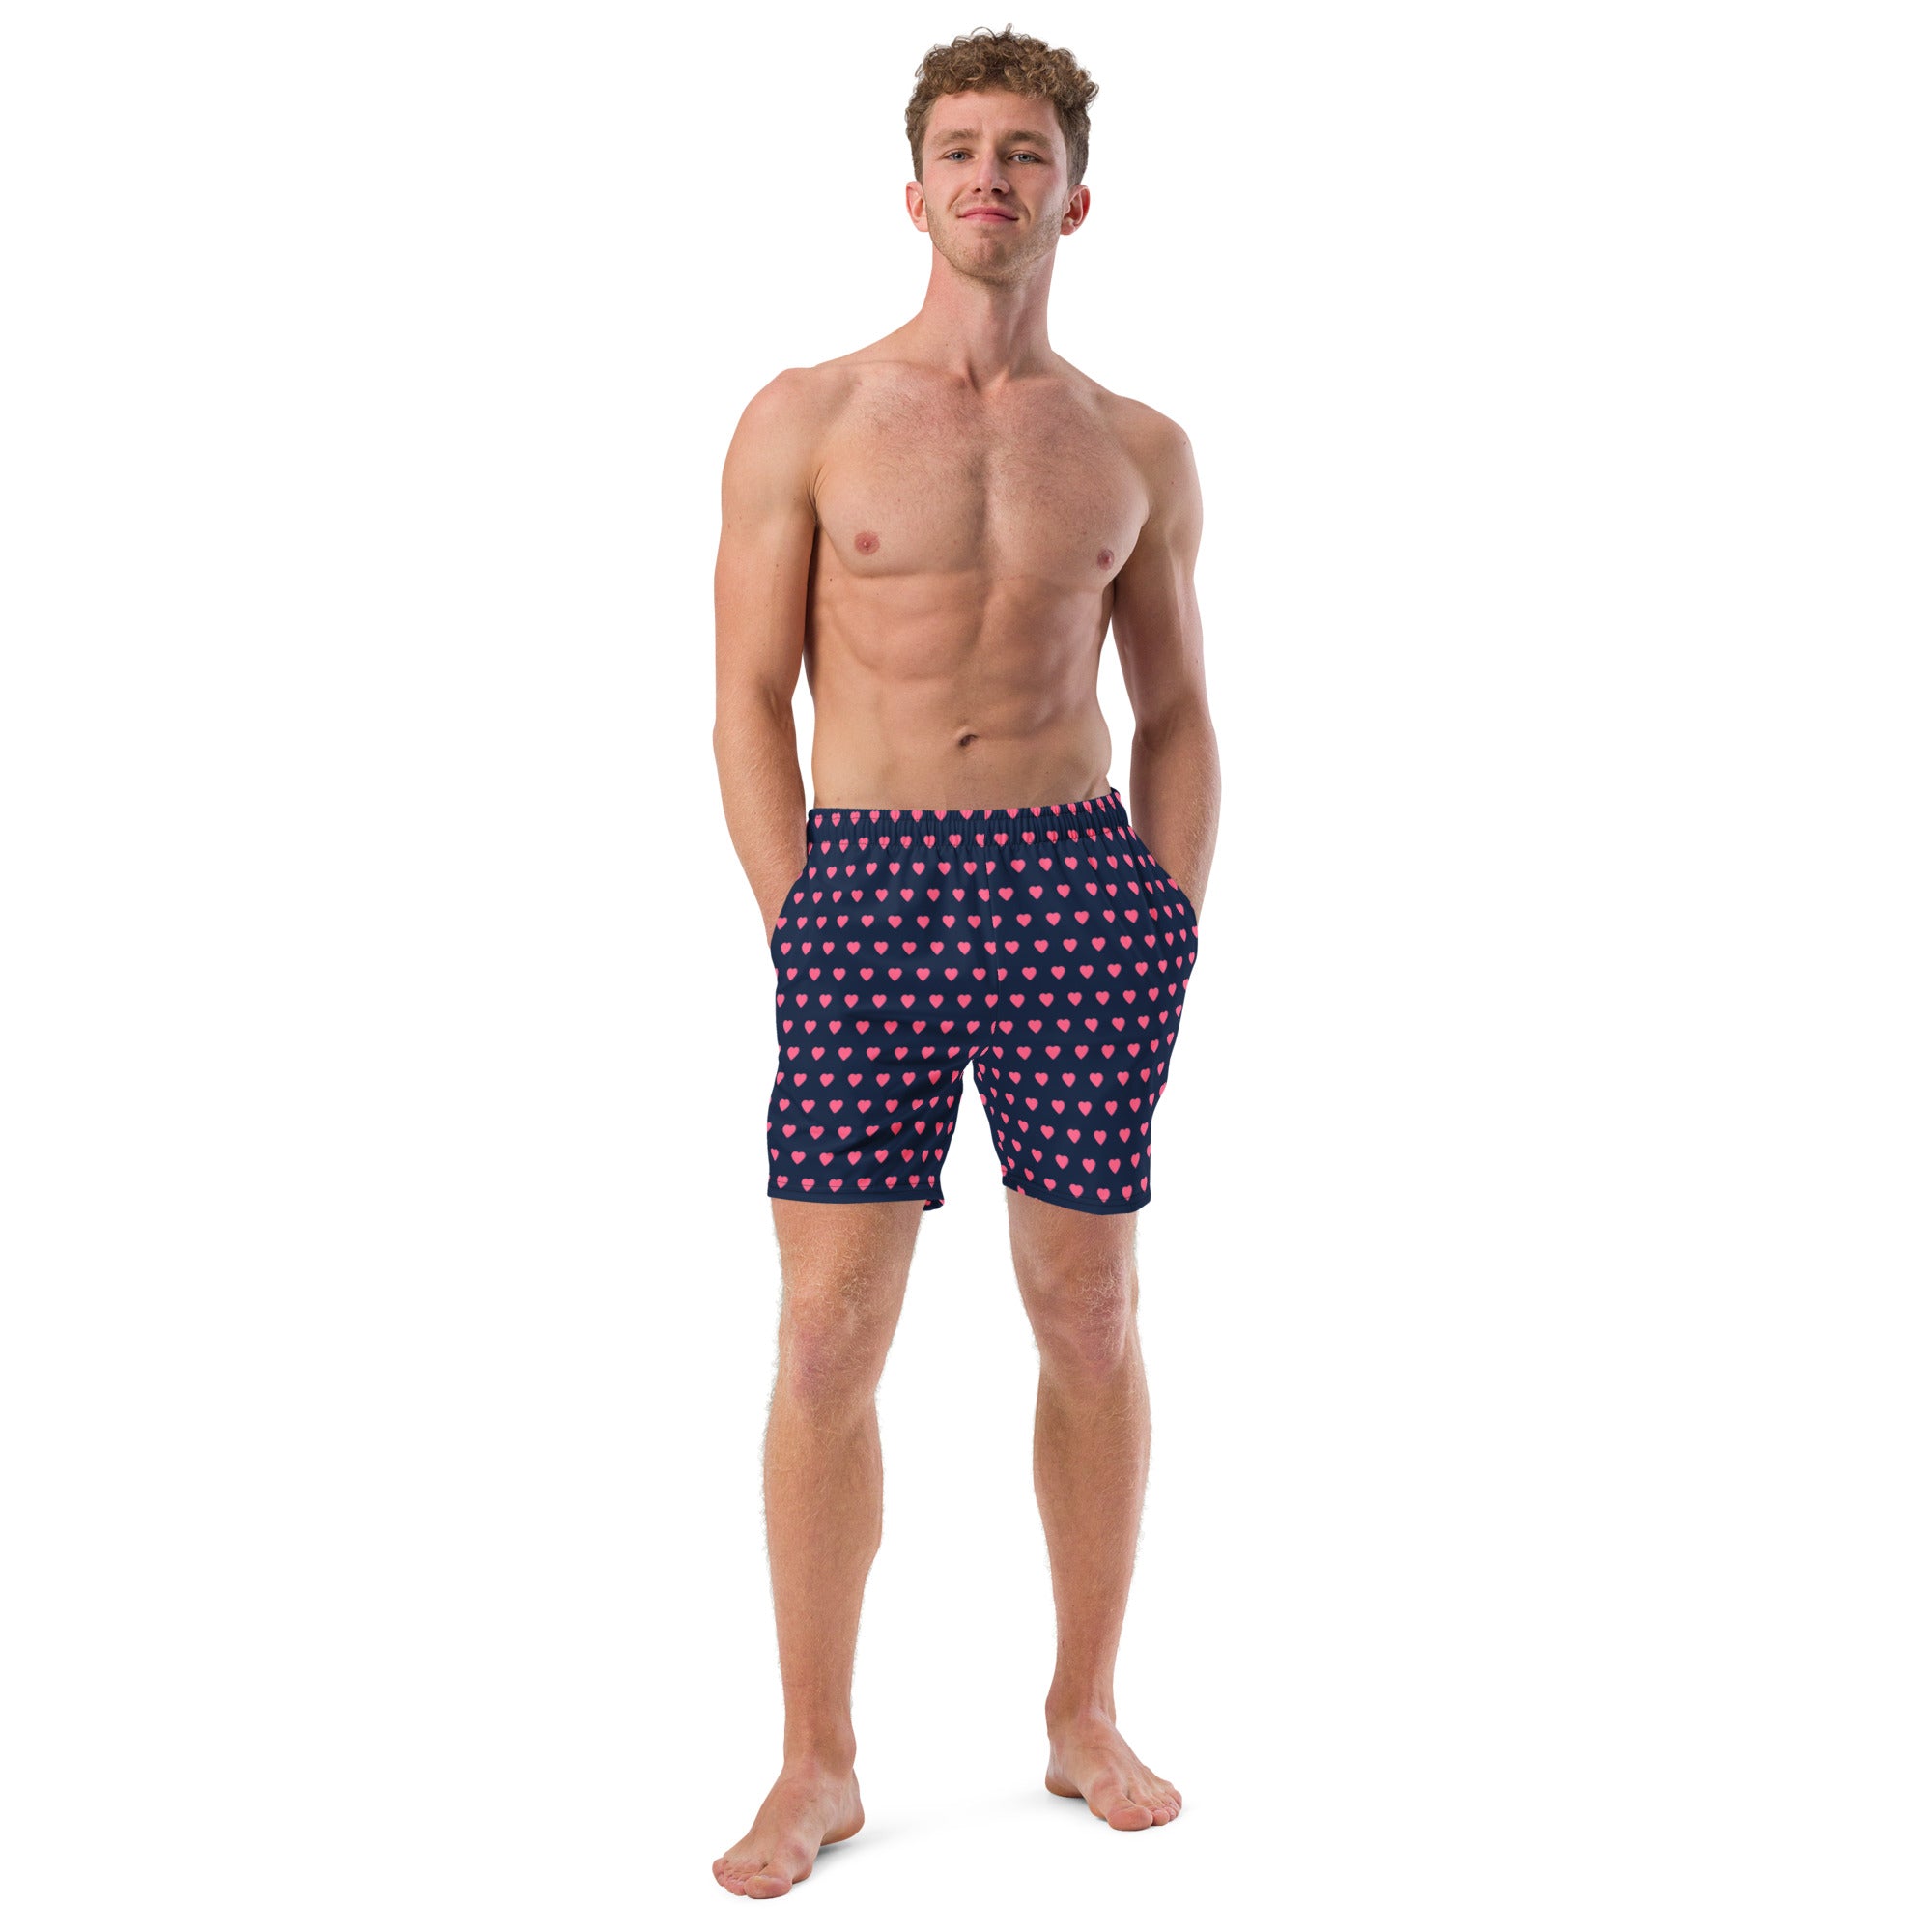 Pink Hearts Men's Swim Trunks, Valentine's Day Print Abstract Print Best Comfortable Men's Luxury Premium Swim Trunks With Mesh Pockets UPF 50+ For Men - Made in USA/EU/MX (US Size: 2XS-6XL) Men's Luxury Swimming Trunks, Best Quality Quick Drying Swim Trunks, Best Beach or Pool Men's Swim Trunks, Swimwear For Men